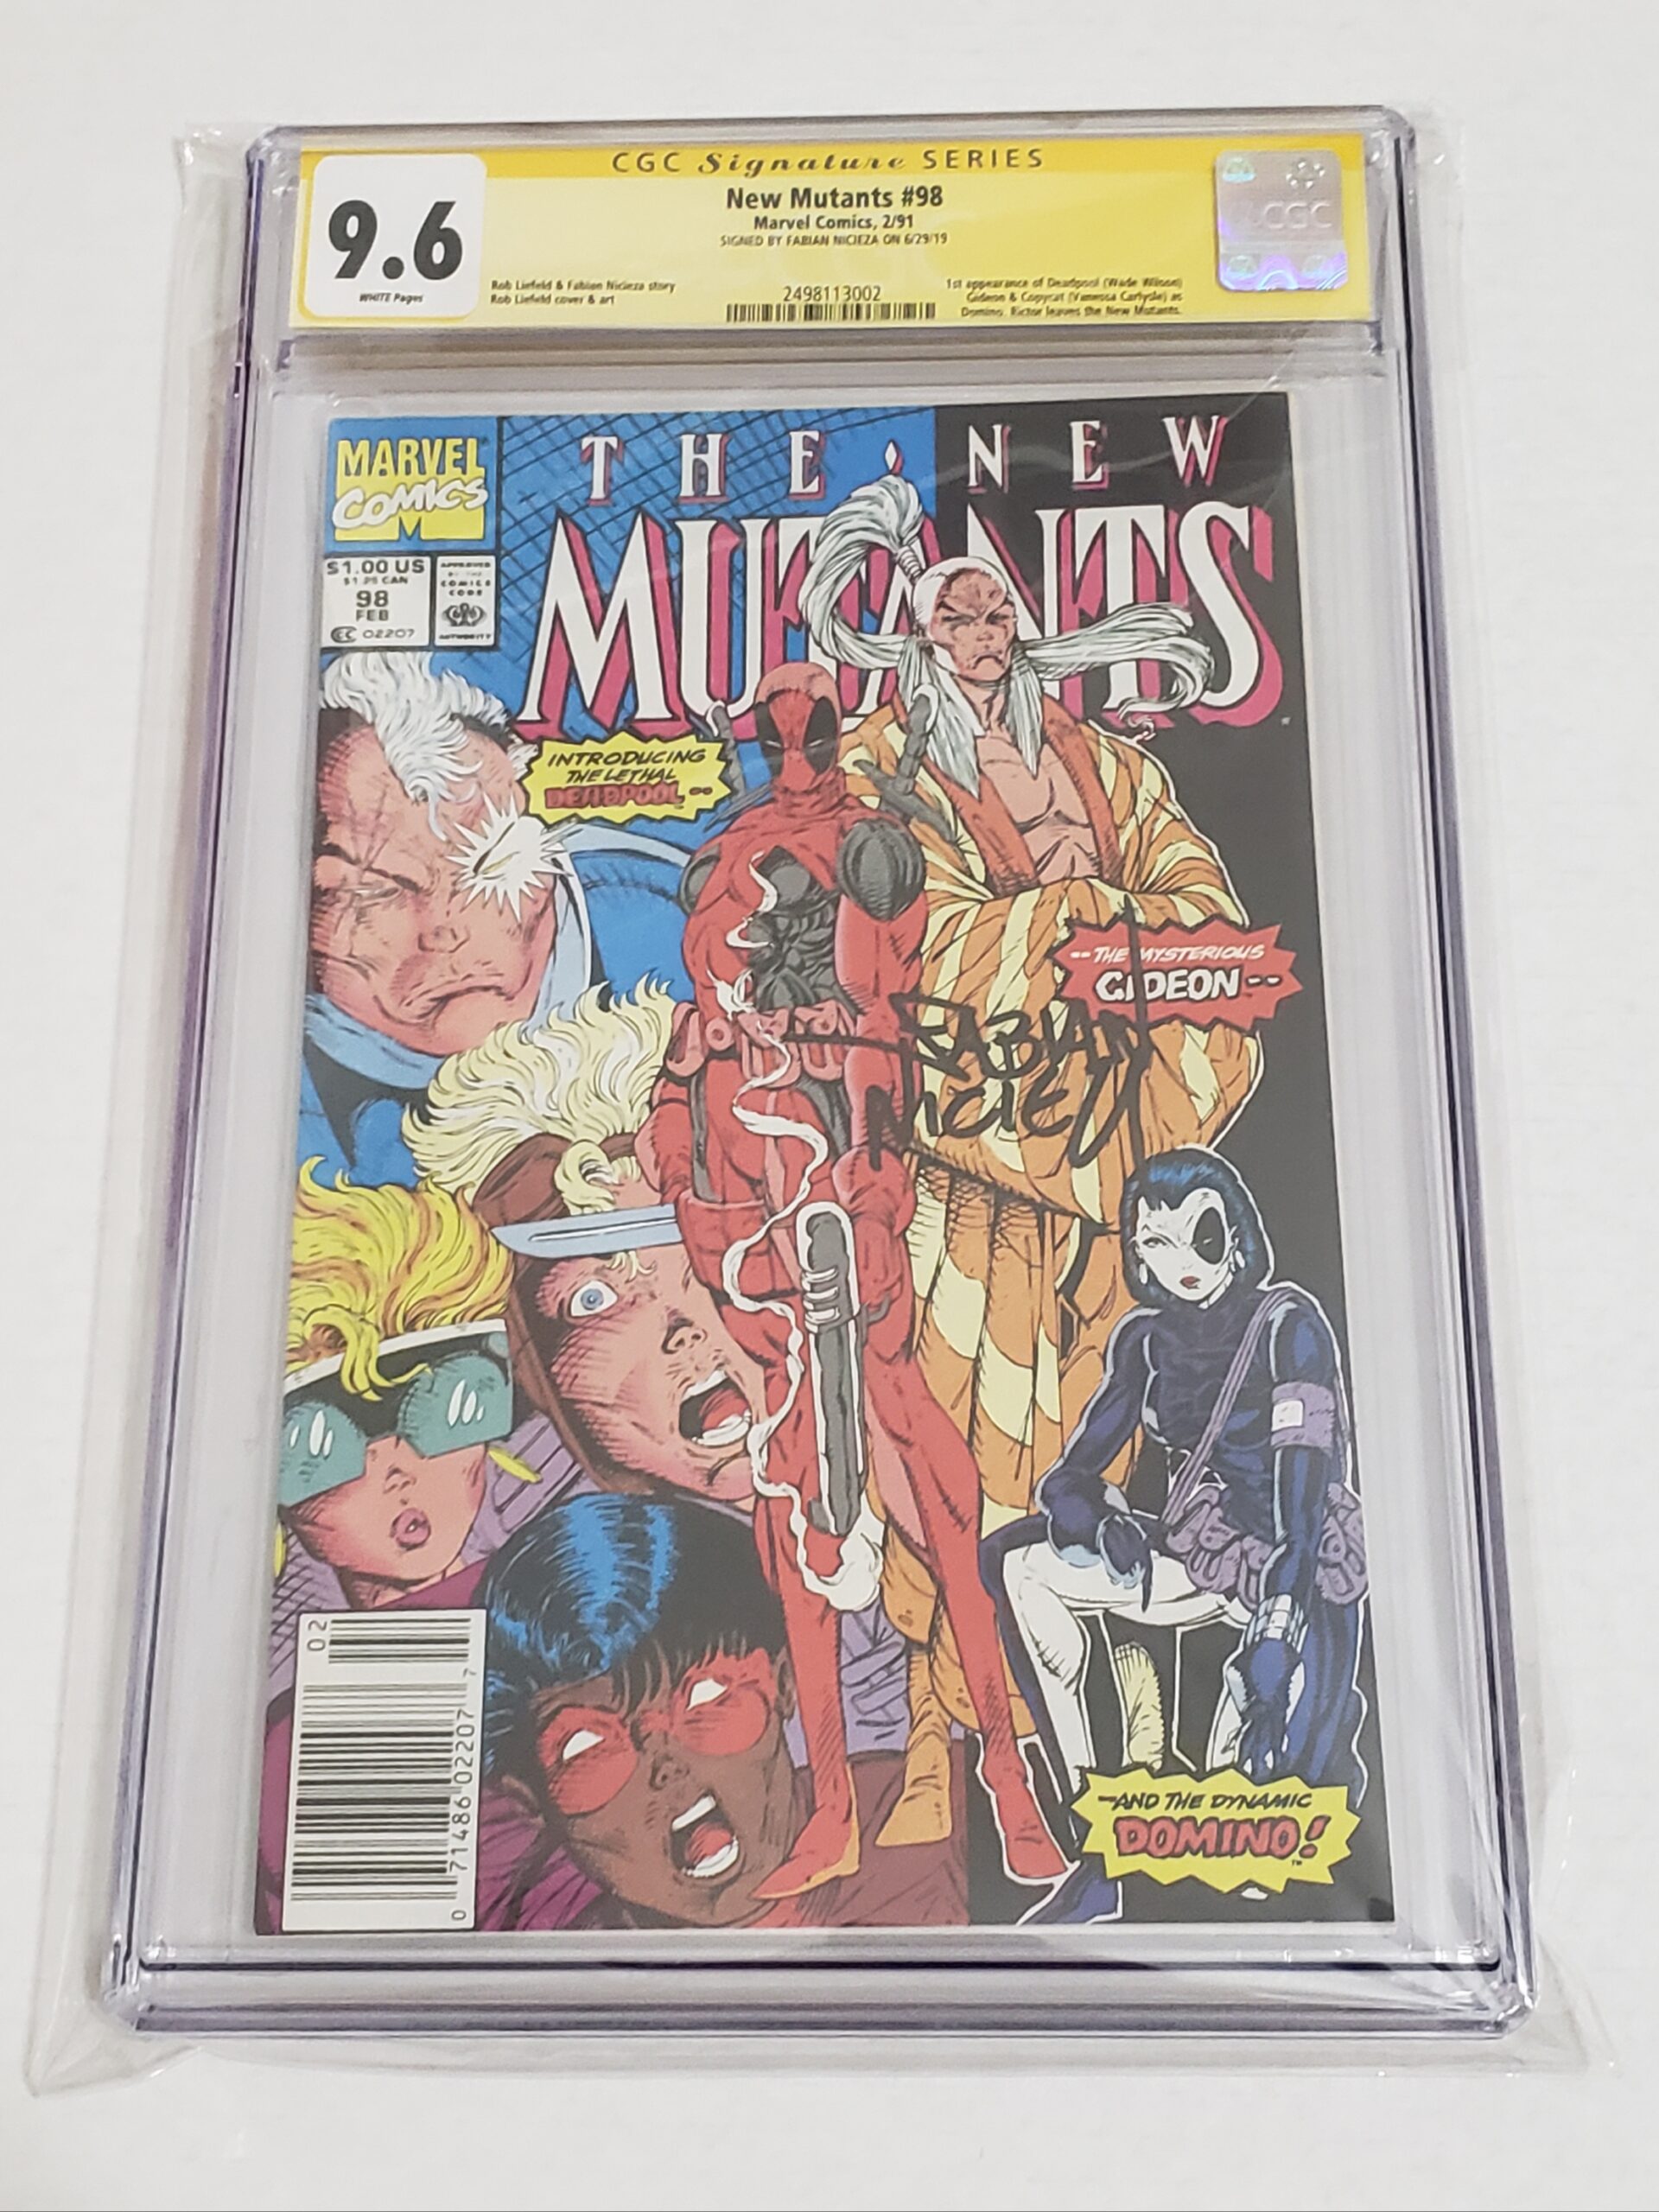 New Mutants #98 First Appearance of Deadpool CGC 9.6 Newsstand signed by Fabian Nicieza.